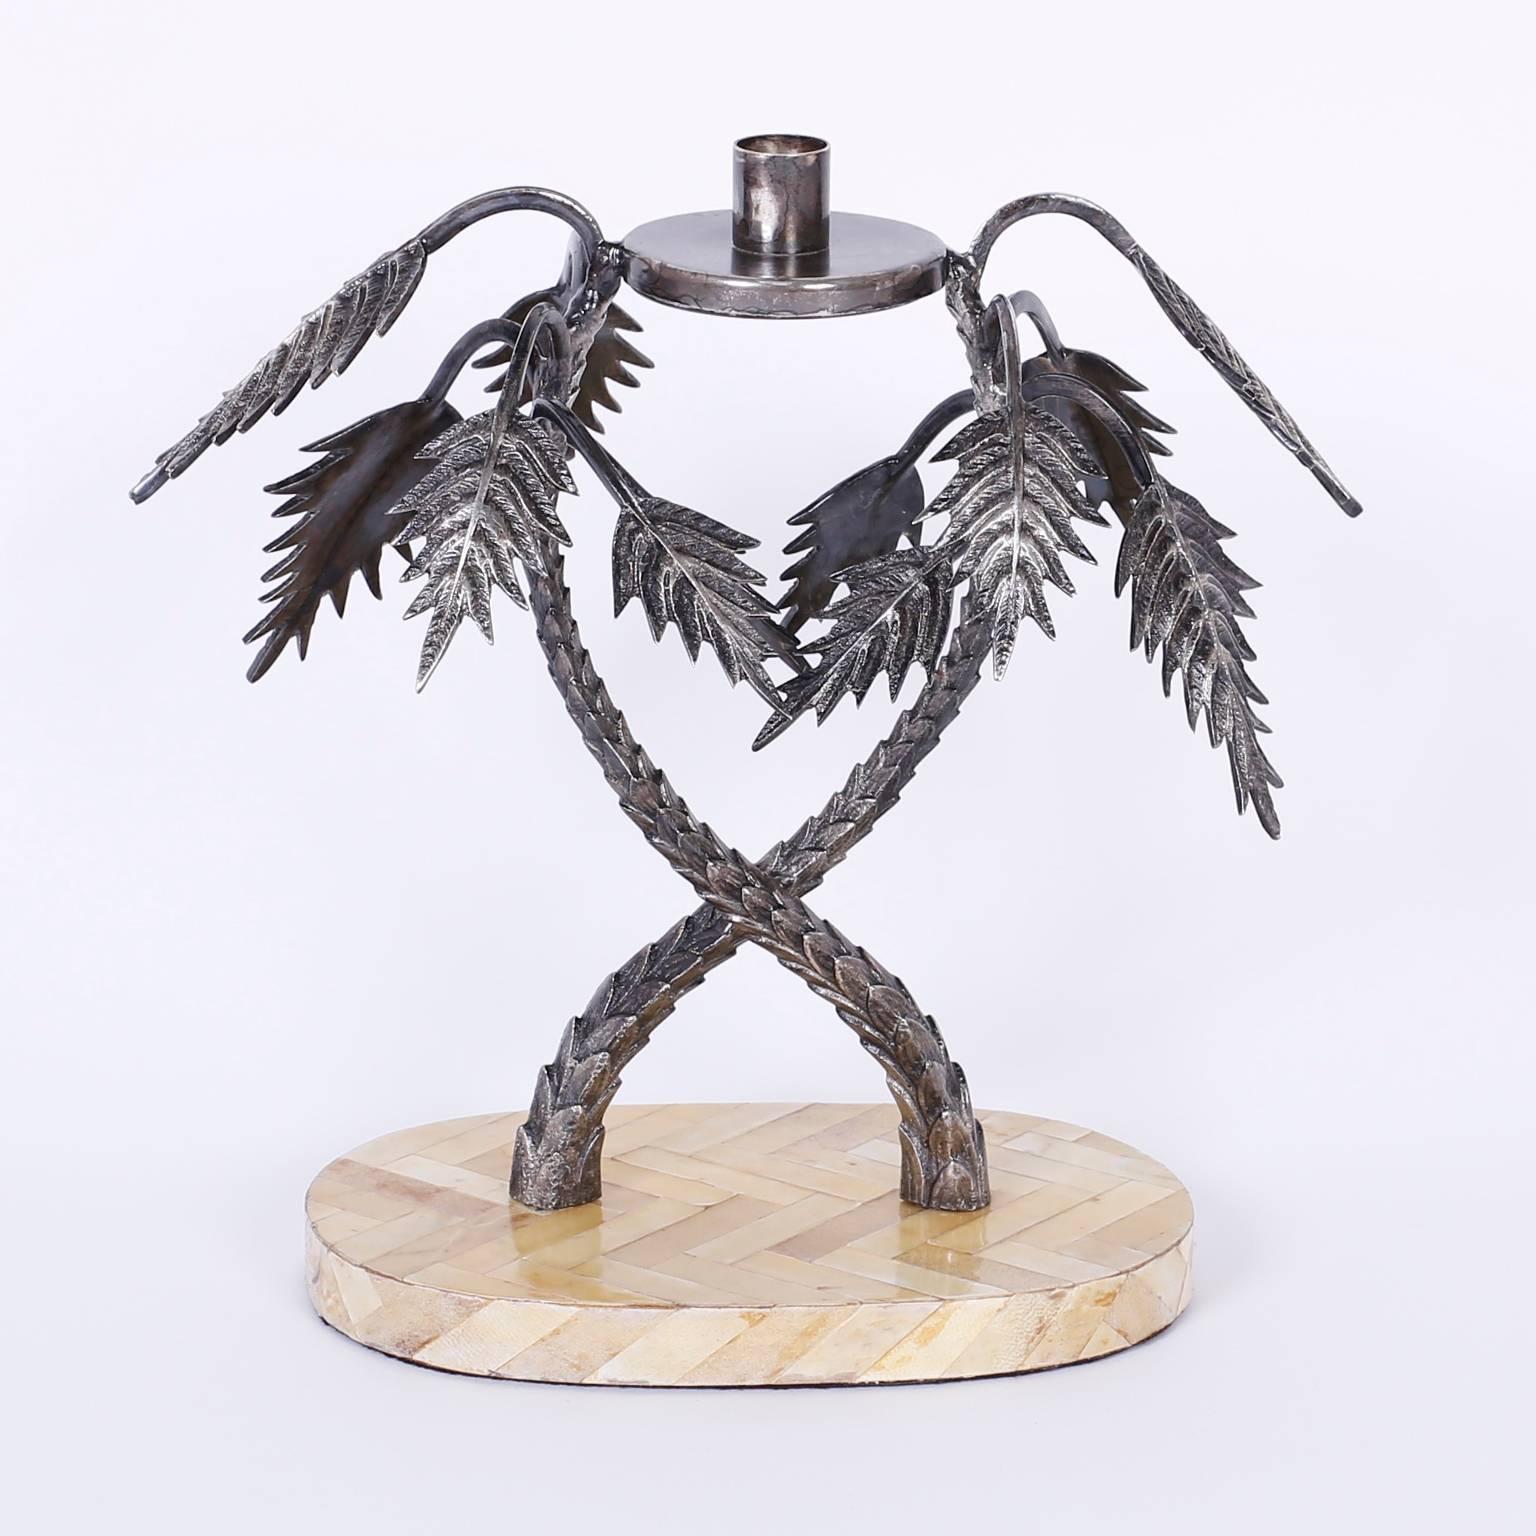 palm tree candle holders